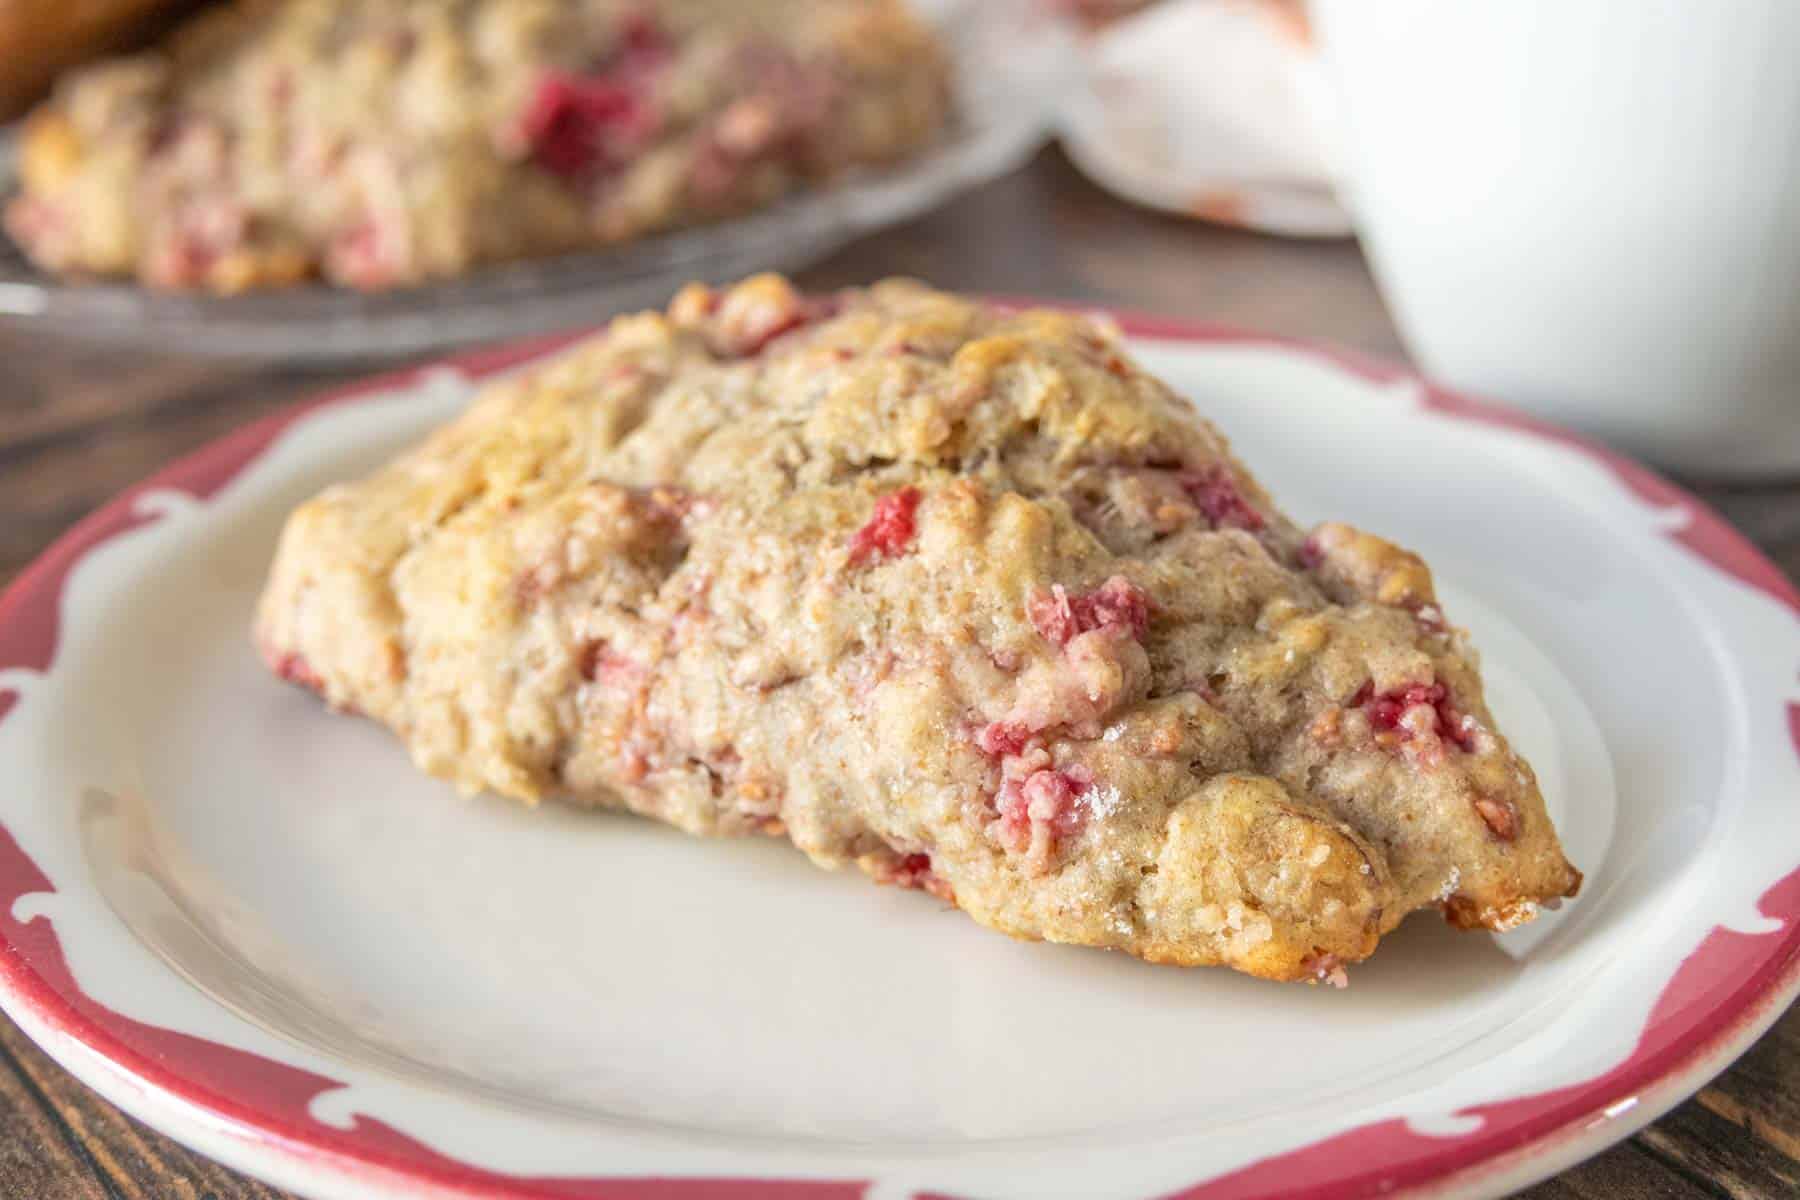 Raspberry scone on a small plate.